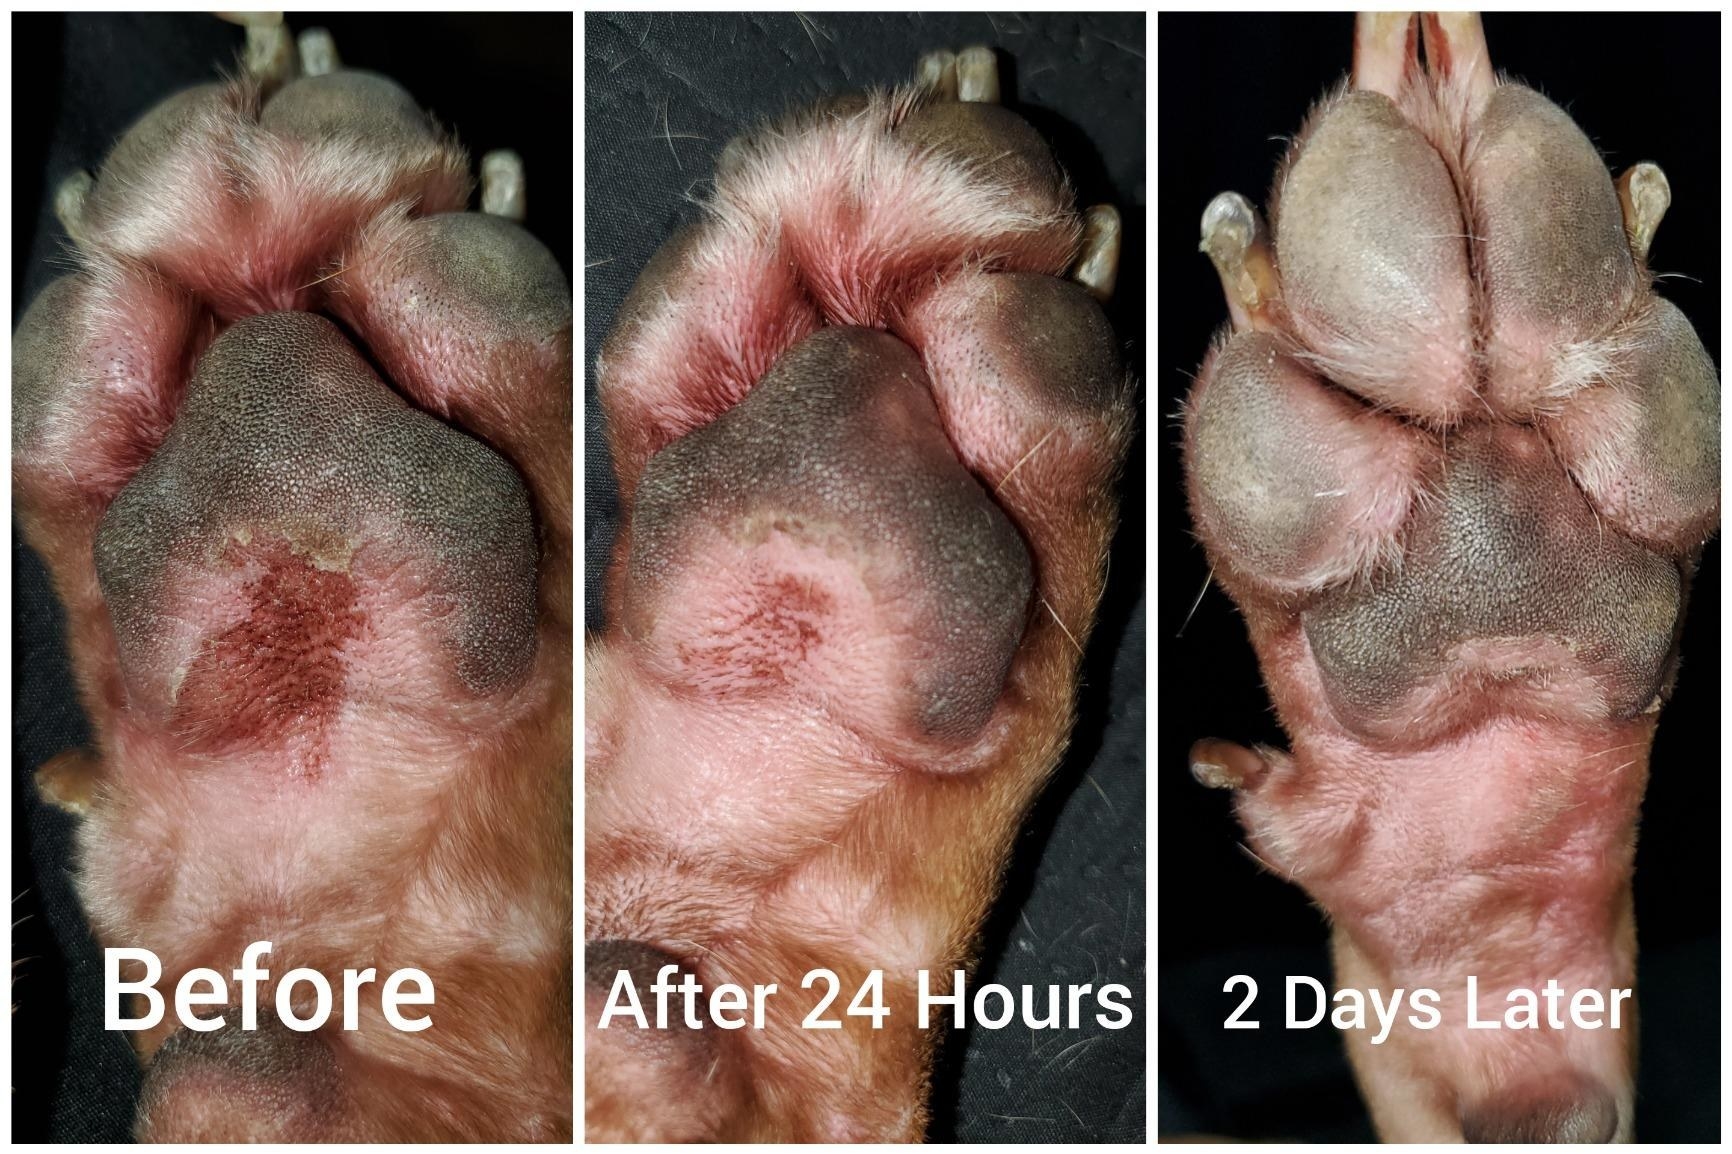 Progression photos showing a red rash on a dog&#x27;s paw disappearing over a period of two days